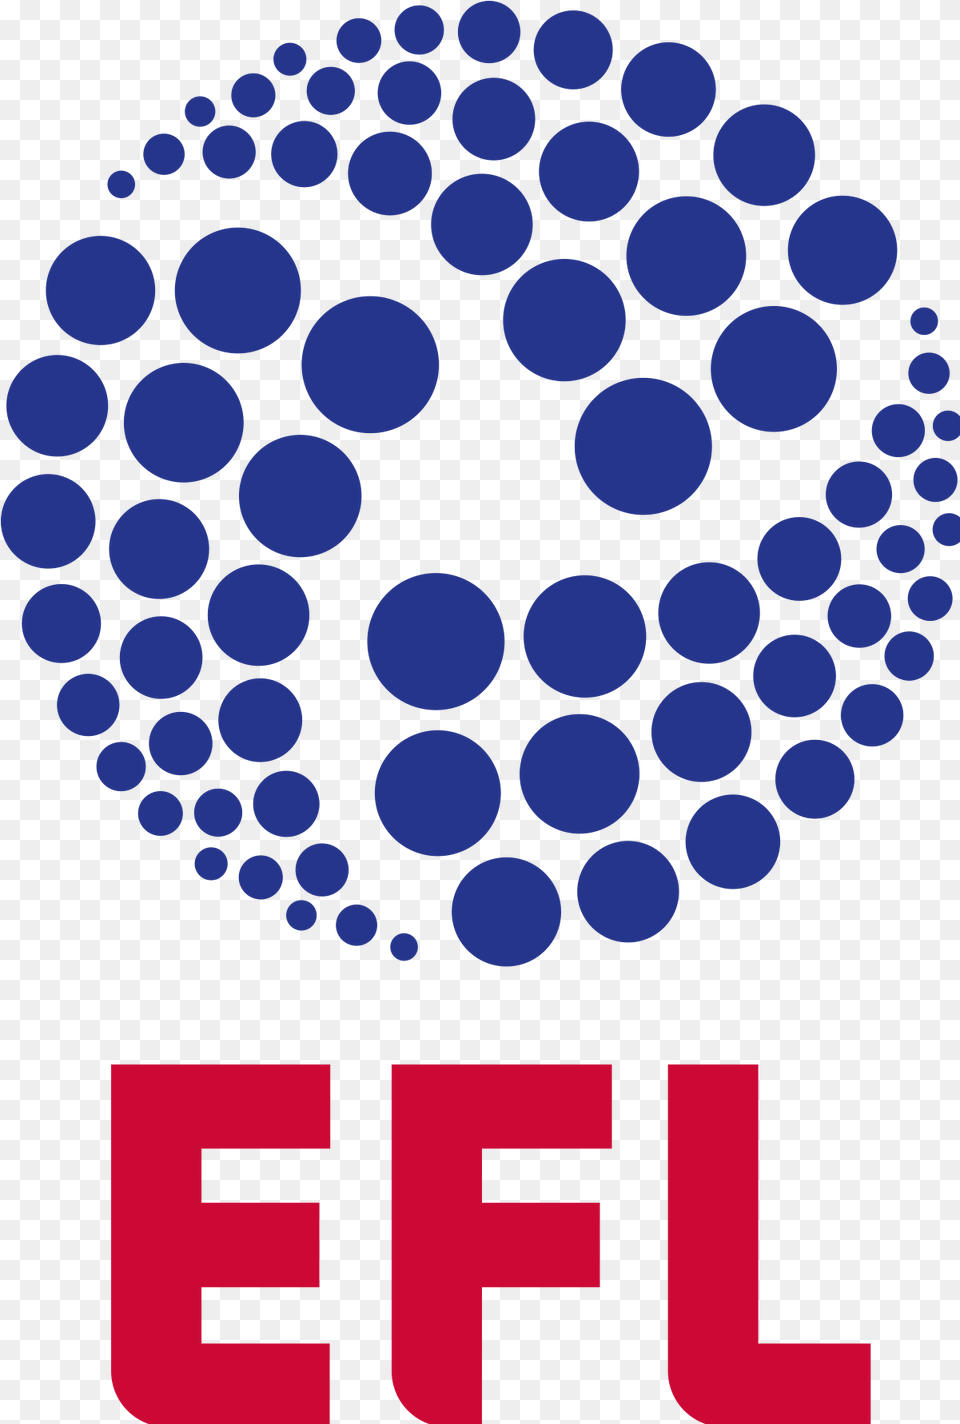 Pog Champ English Football League, Sphere, Logo, Pattern, Outdoors Free Transparent Png